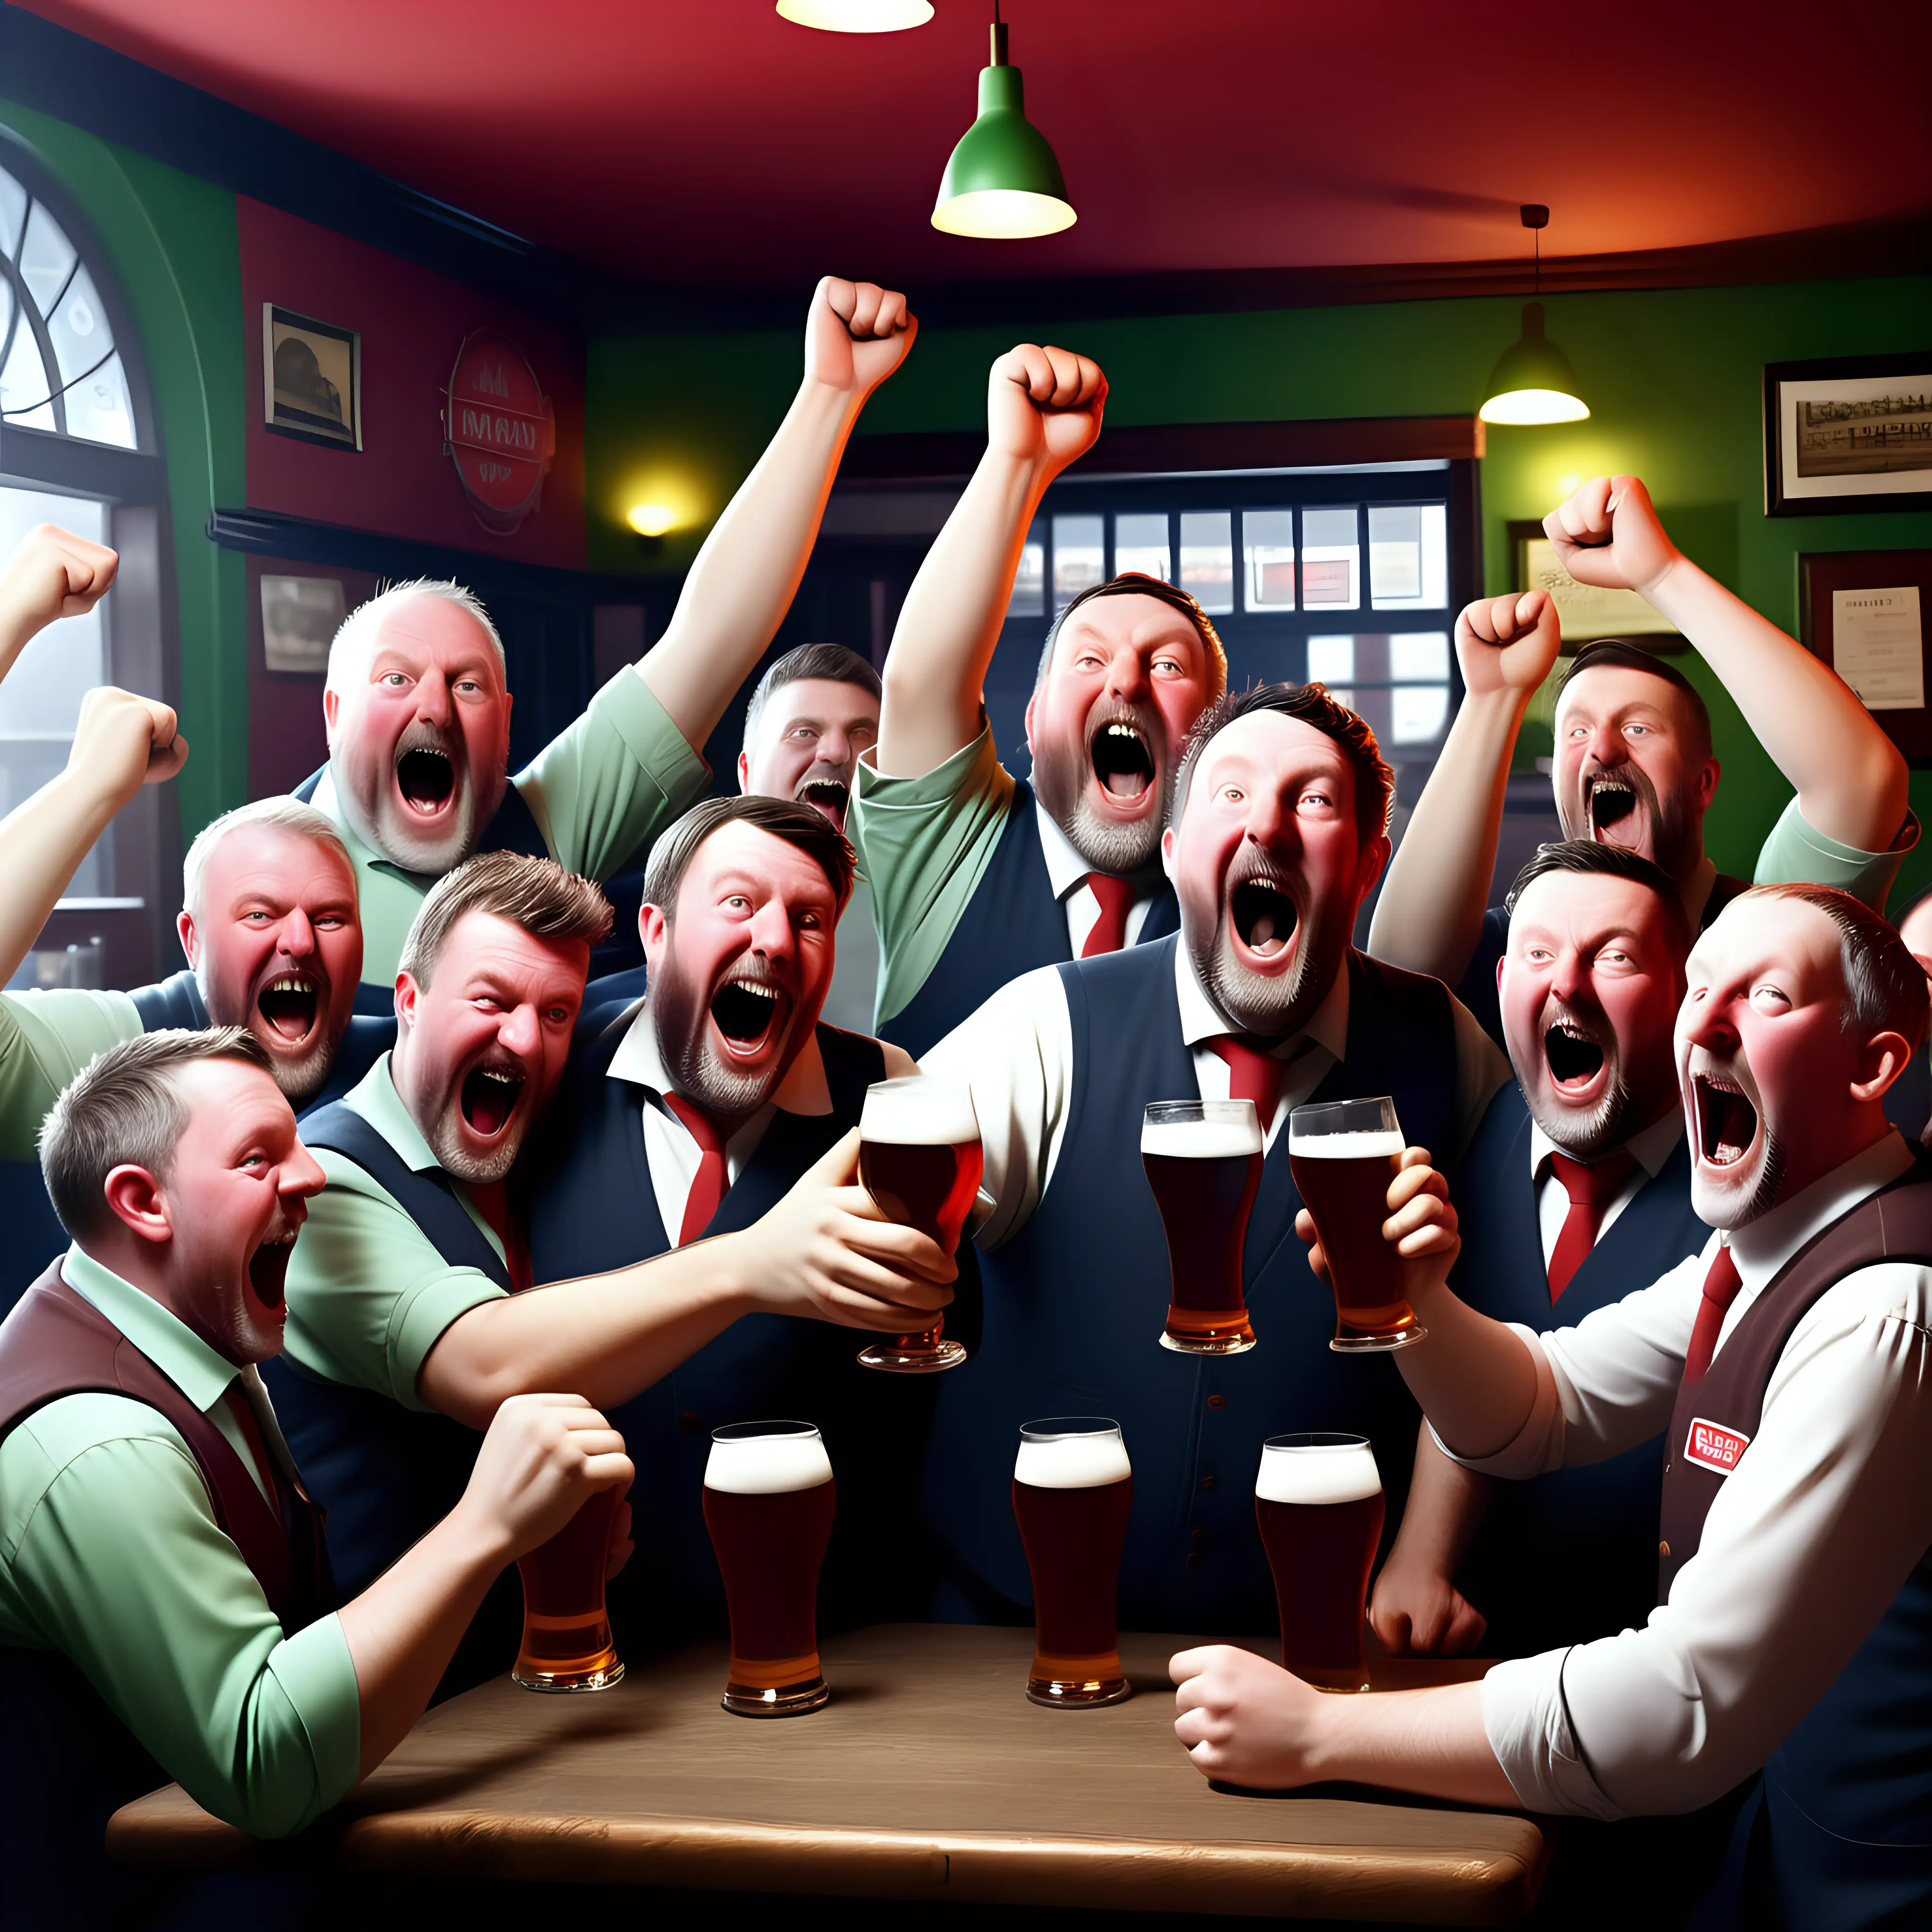 surrealistic image of the labour union members celebrating a succesfull strike in a pub.